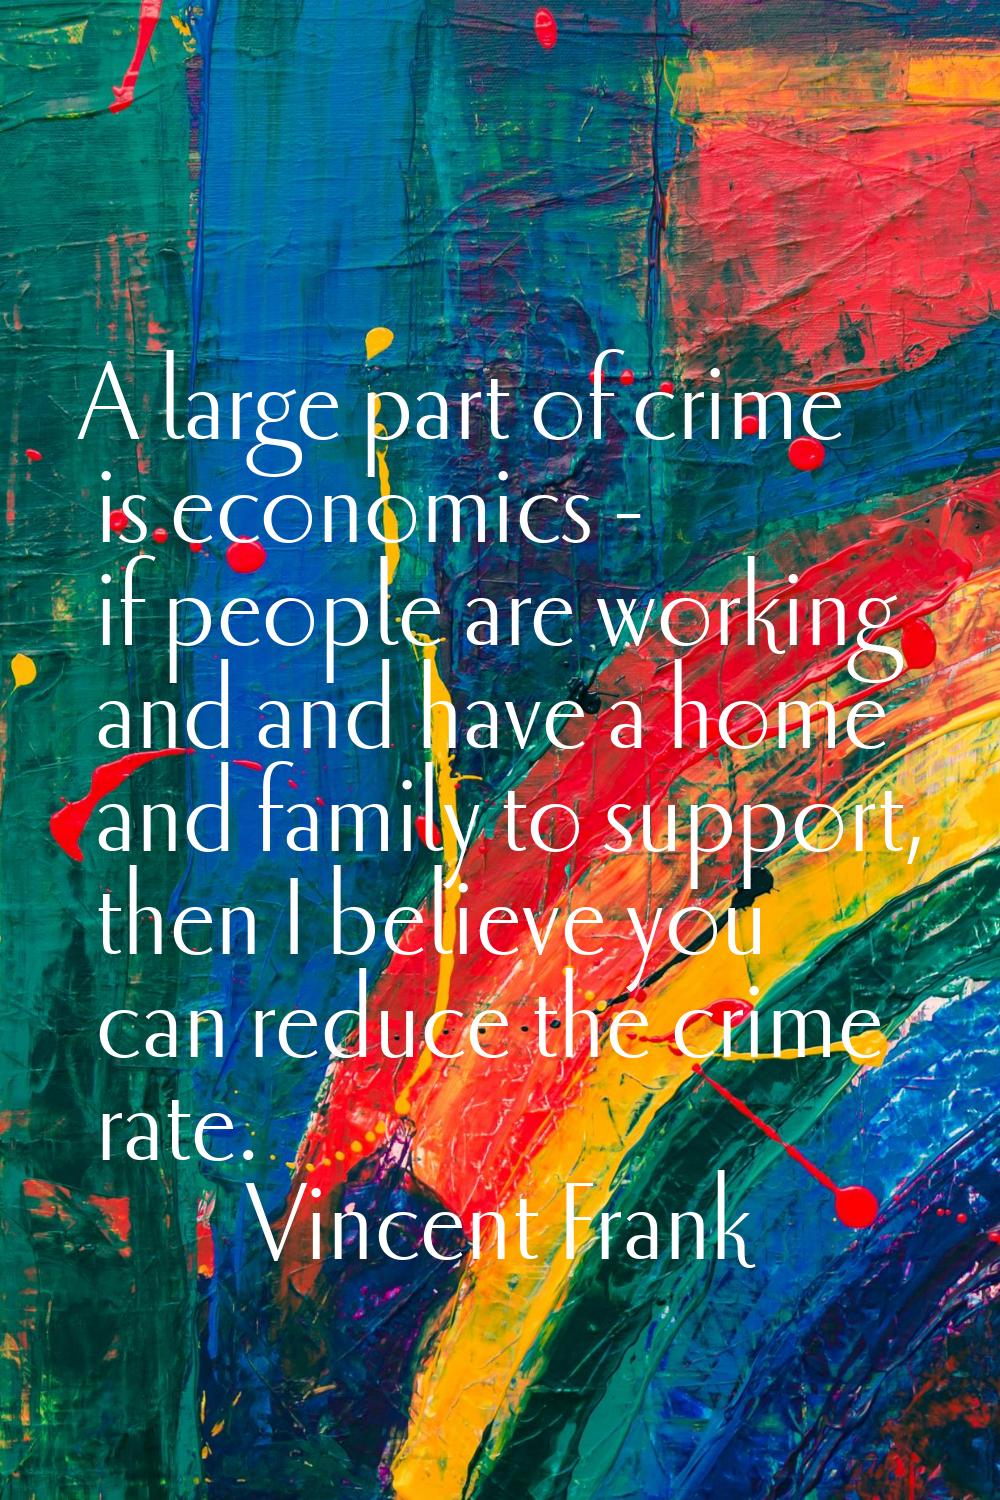 A large part of crime is economics - if people are working and and have a home and family to suppor